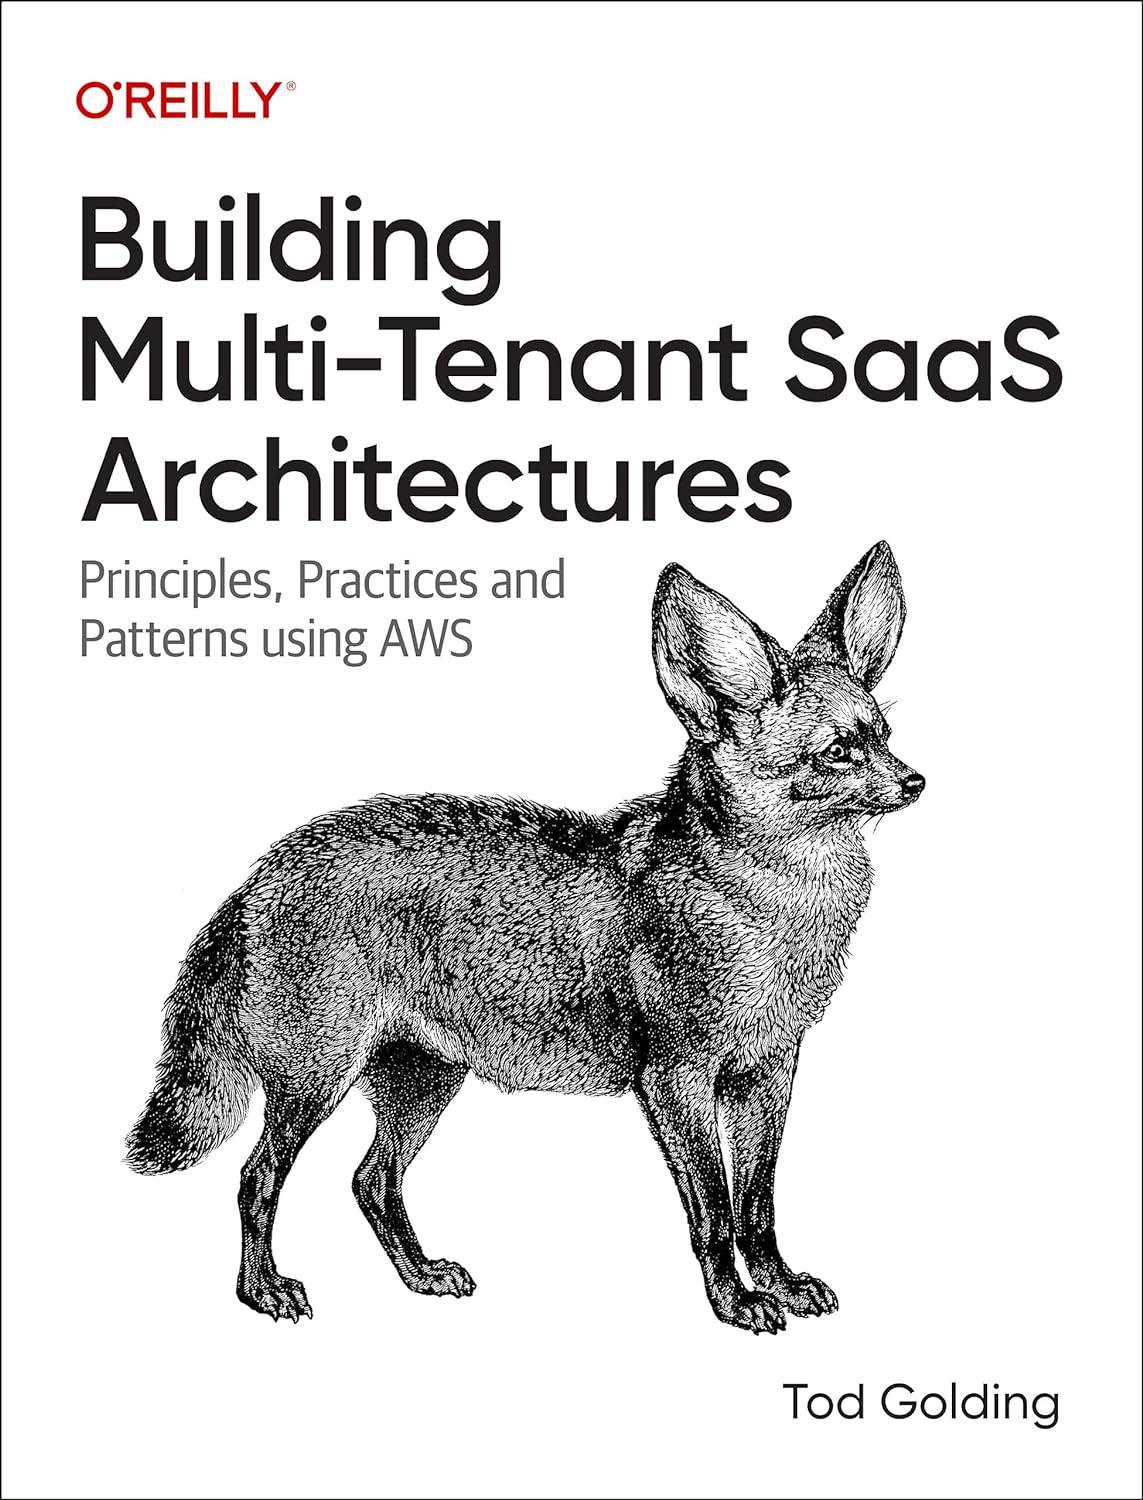 building multi-tenant saas architectures principles practices and patterns using aws 1st edition tod golding